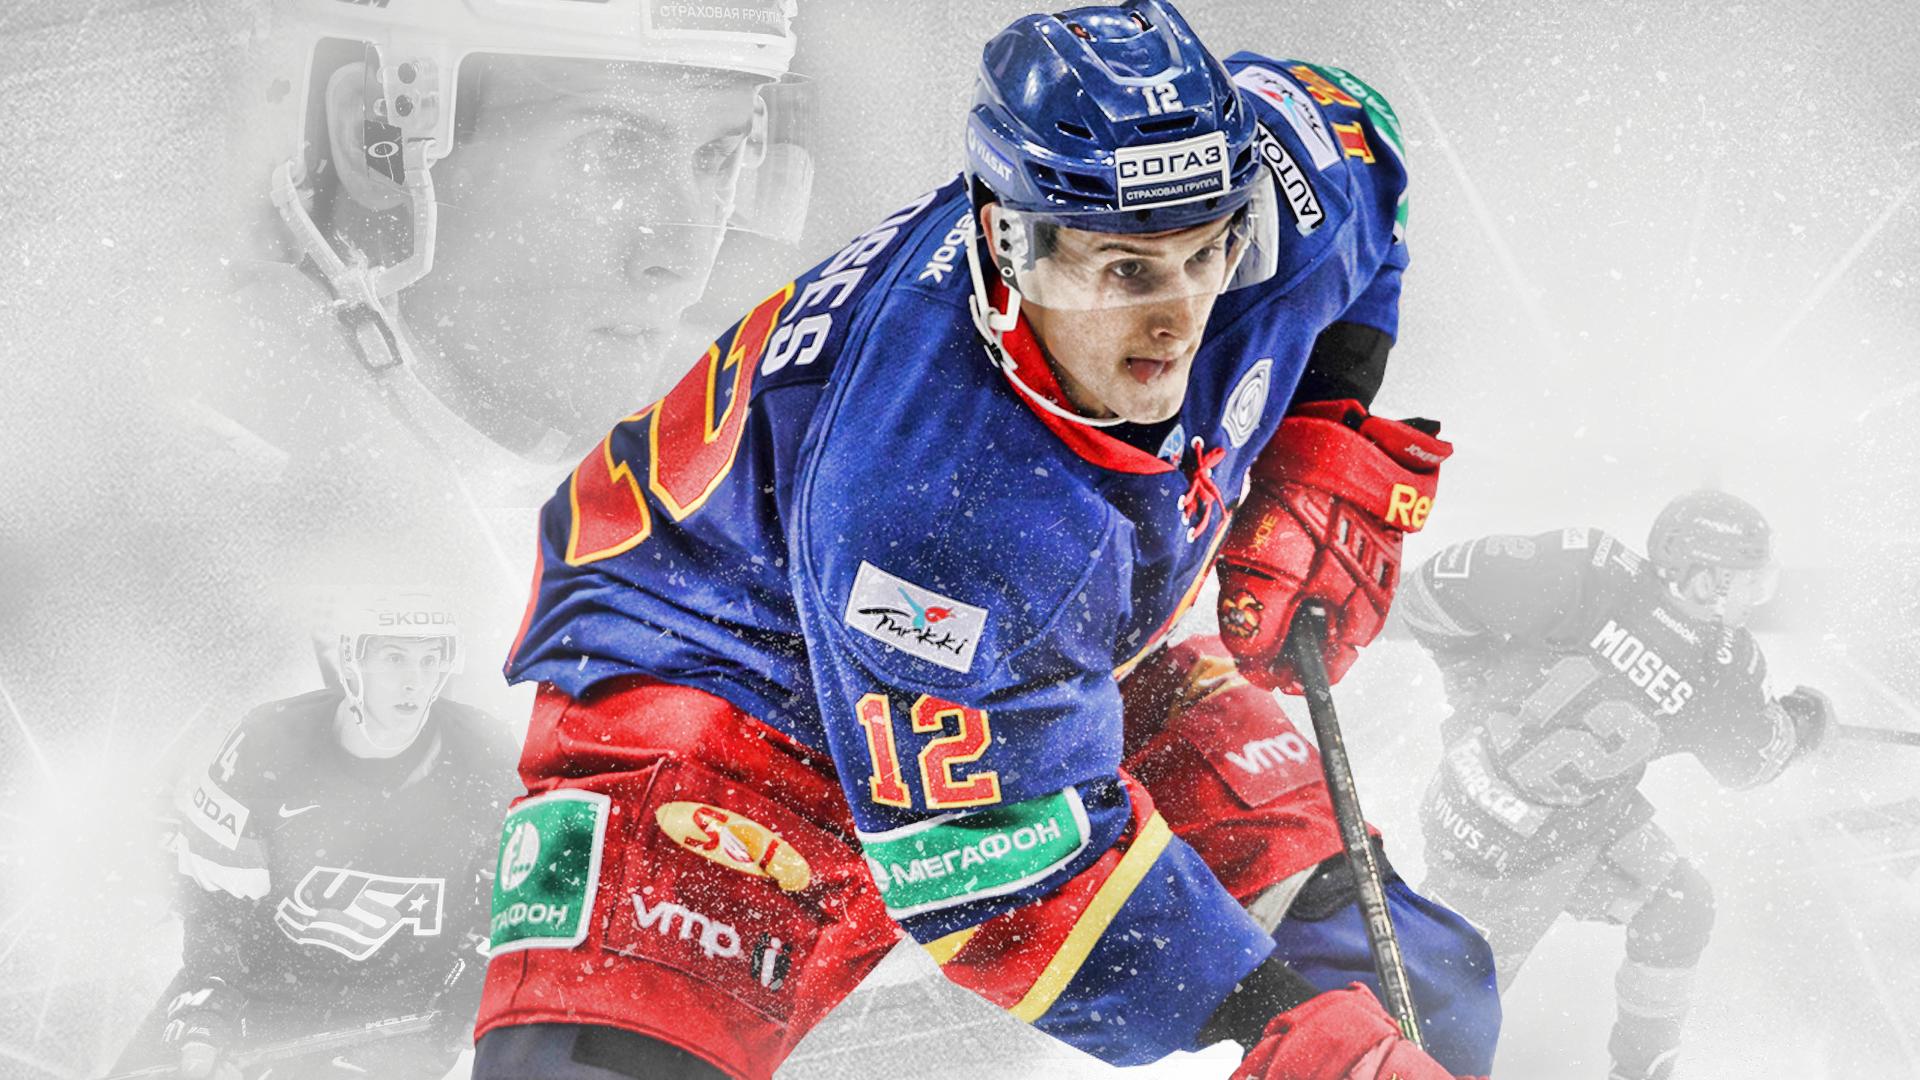 A Wallpaper That I Made Of Steve Moses While Back Jokerit